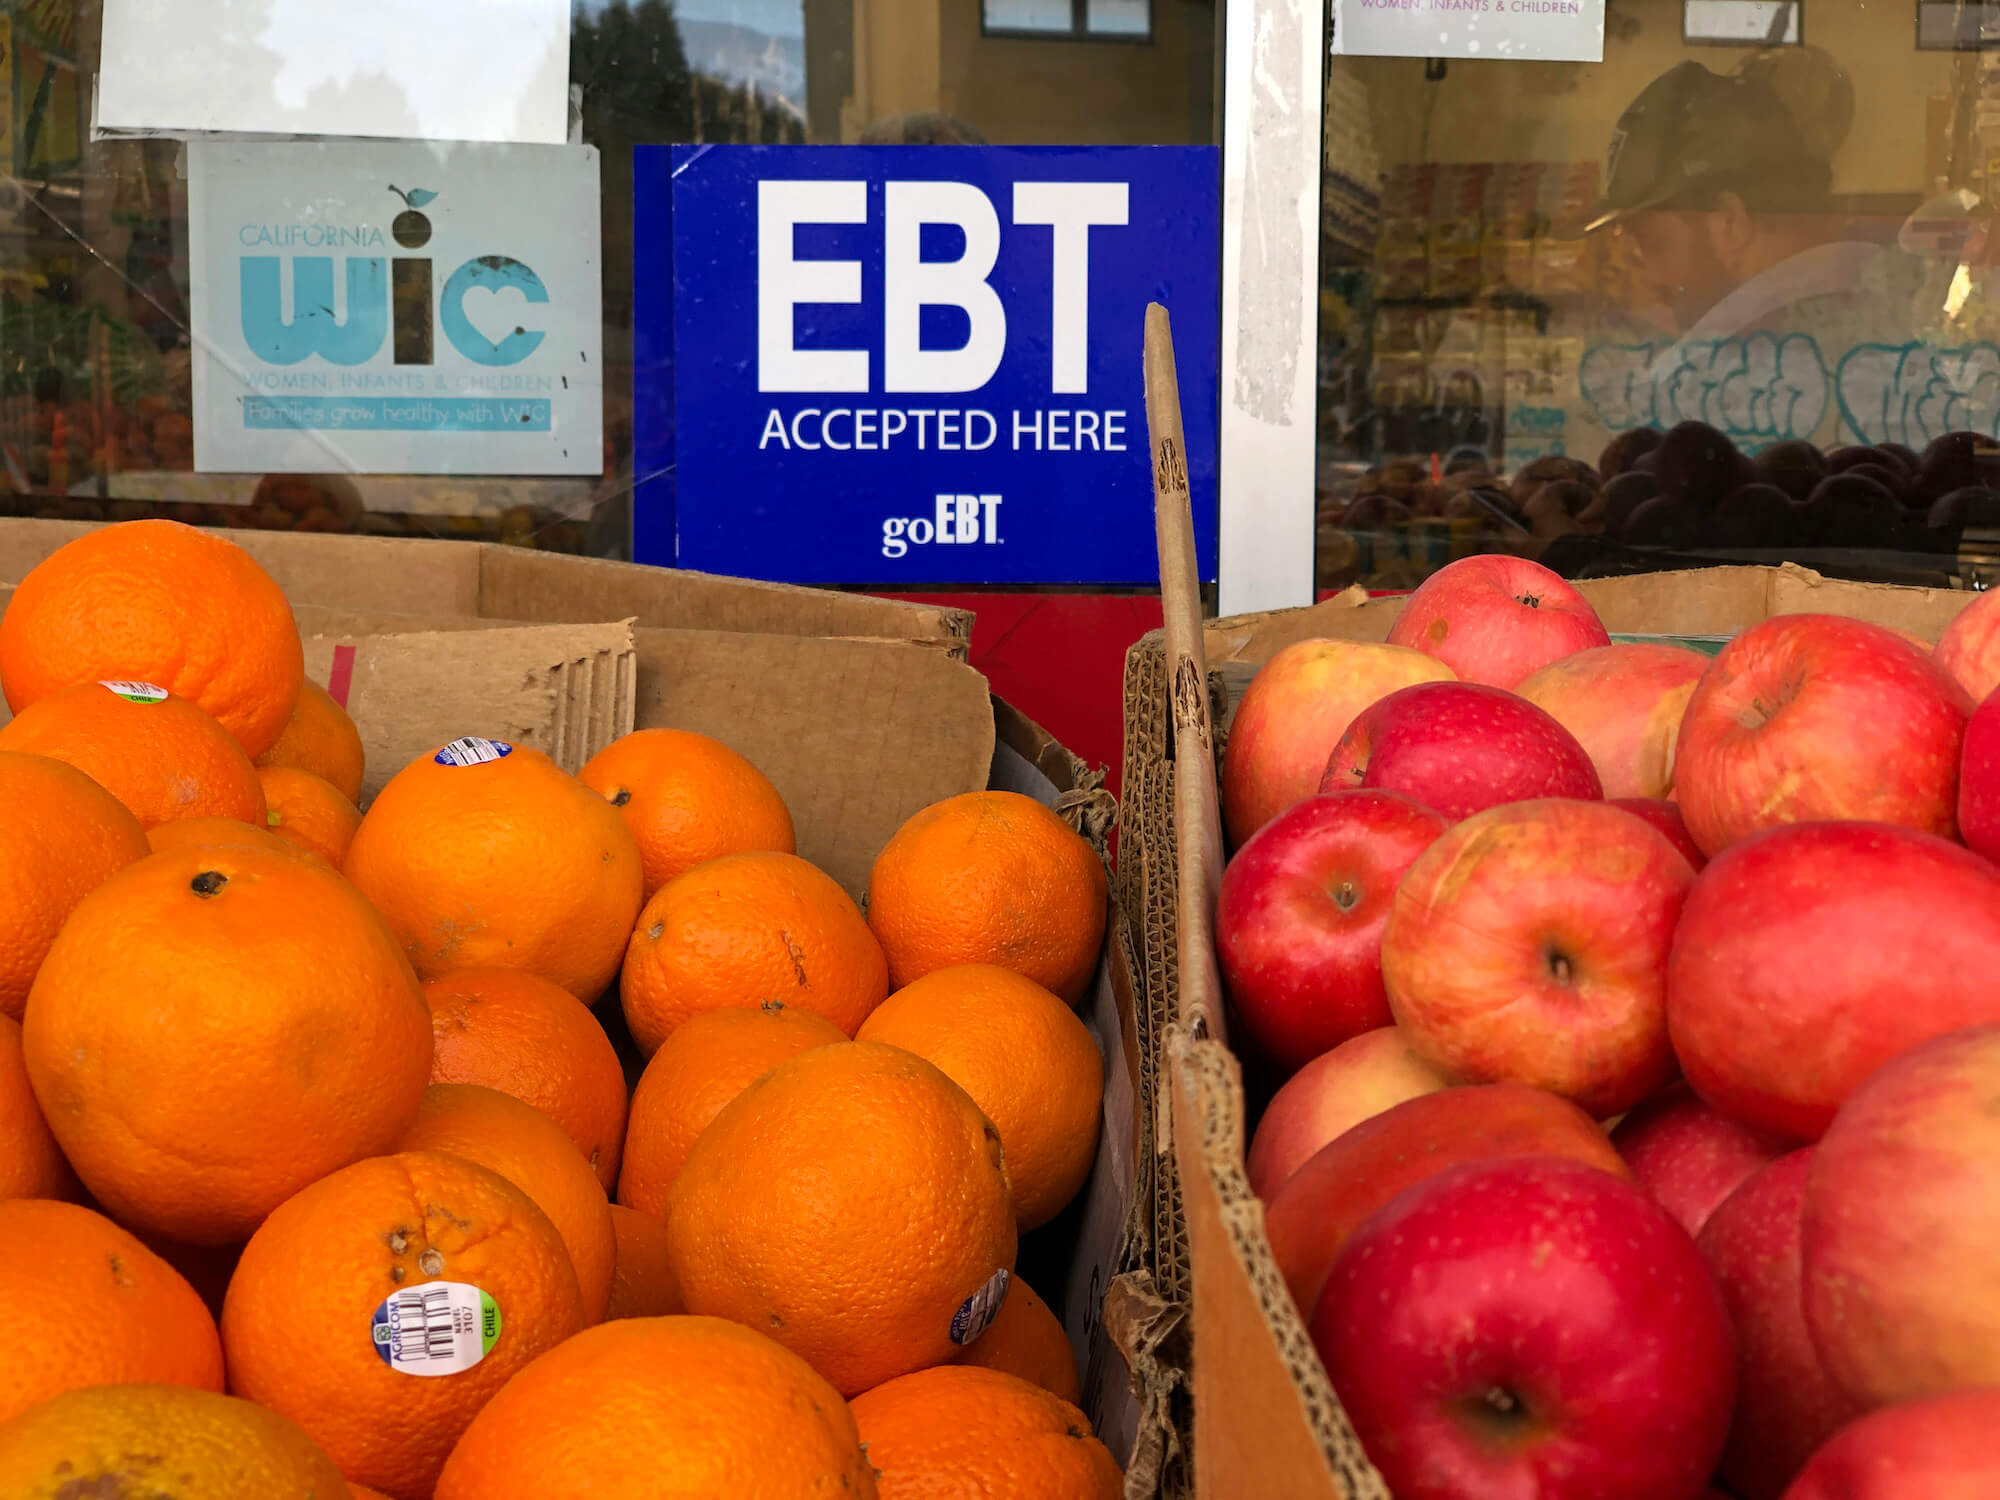 Orange and apples in cardboard boxes outside of a grocery store window. A blue EBT accepted here sticker next to a California WIC sticker in the window. December 2019